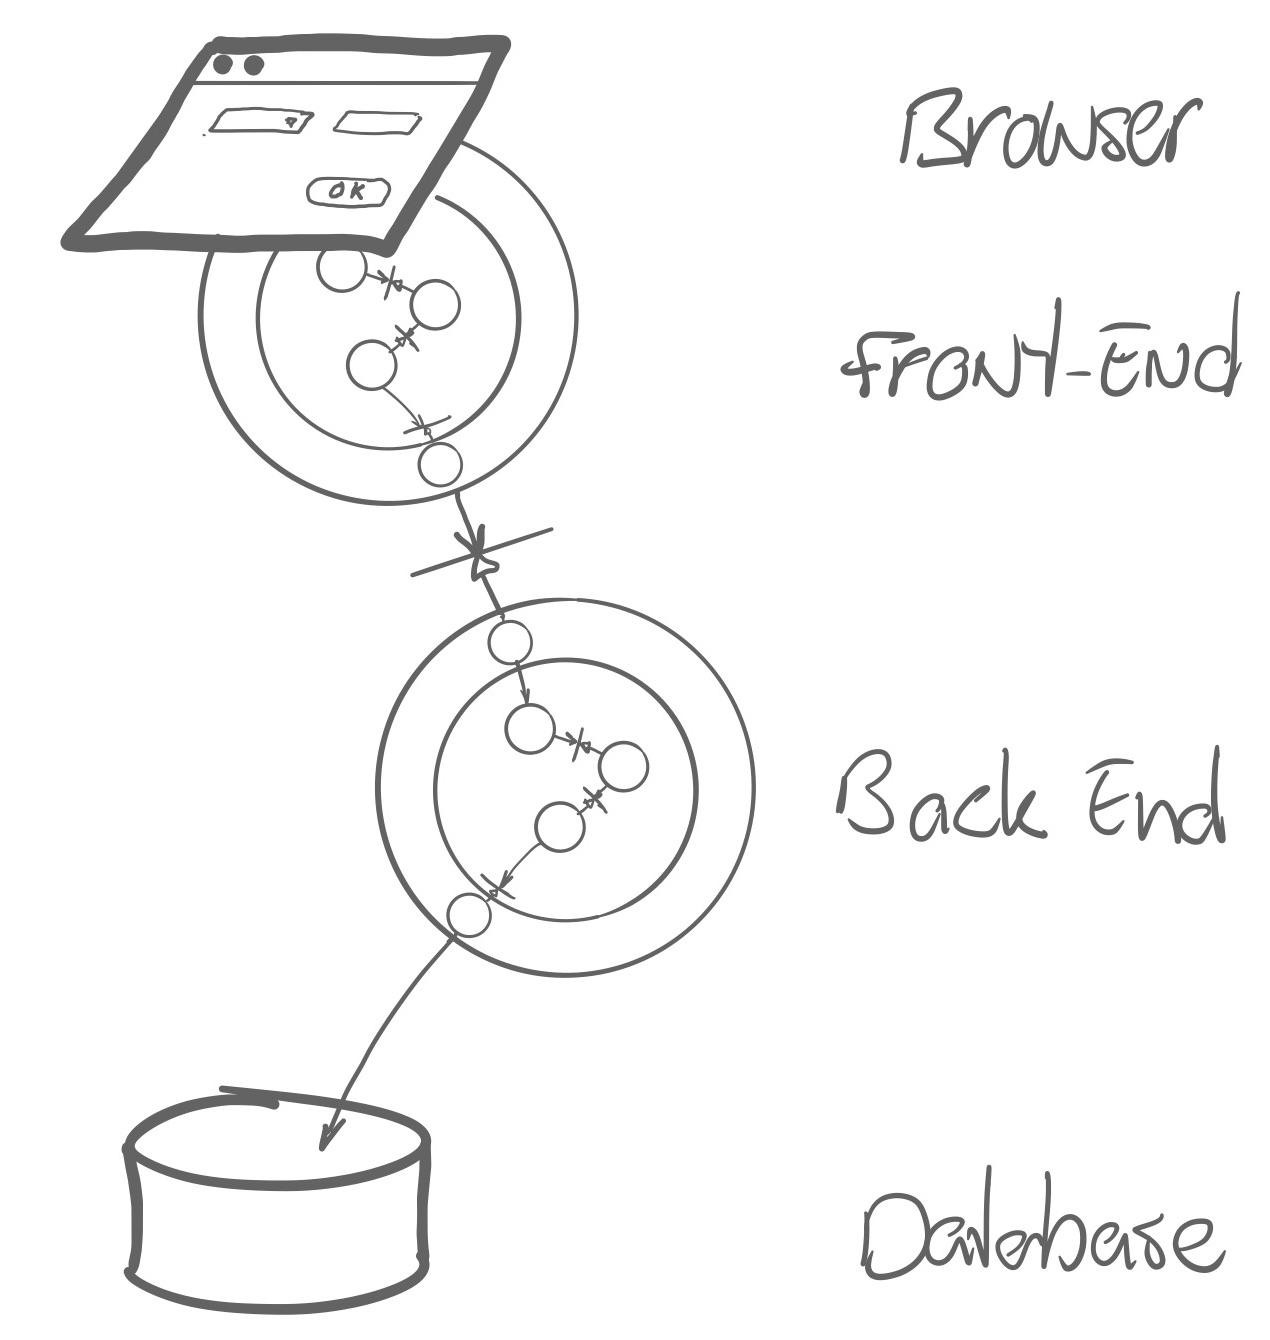 typical architecture: front end, back end, database